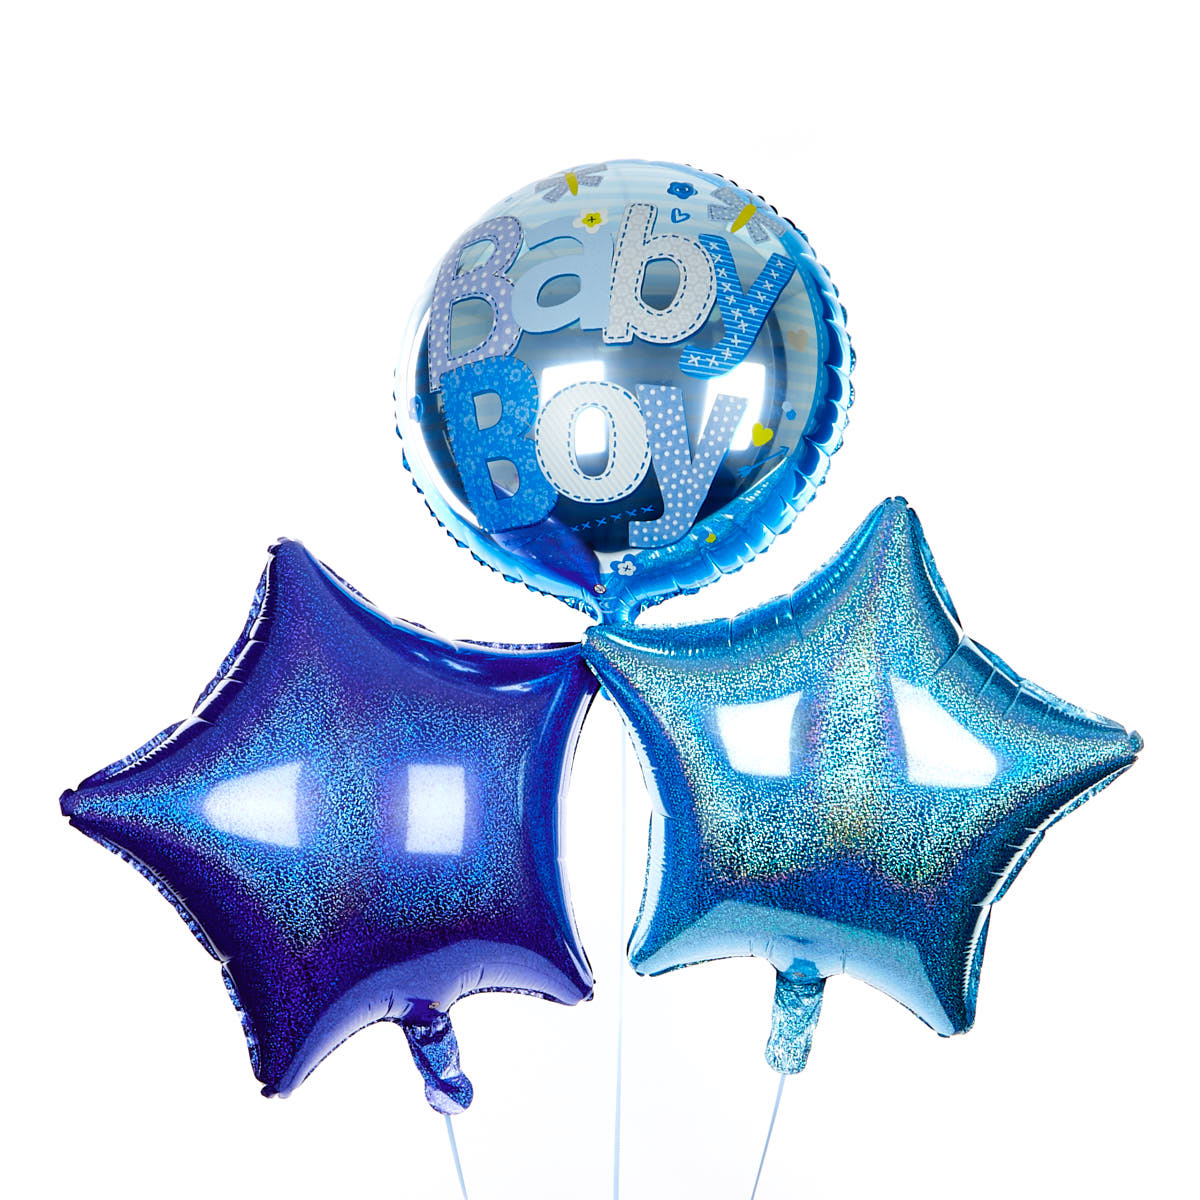 Blue Baby Boy Balloon Bouquet - DELIVERED INFLATED!